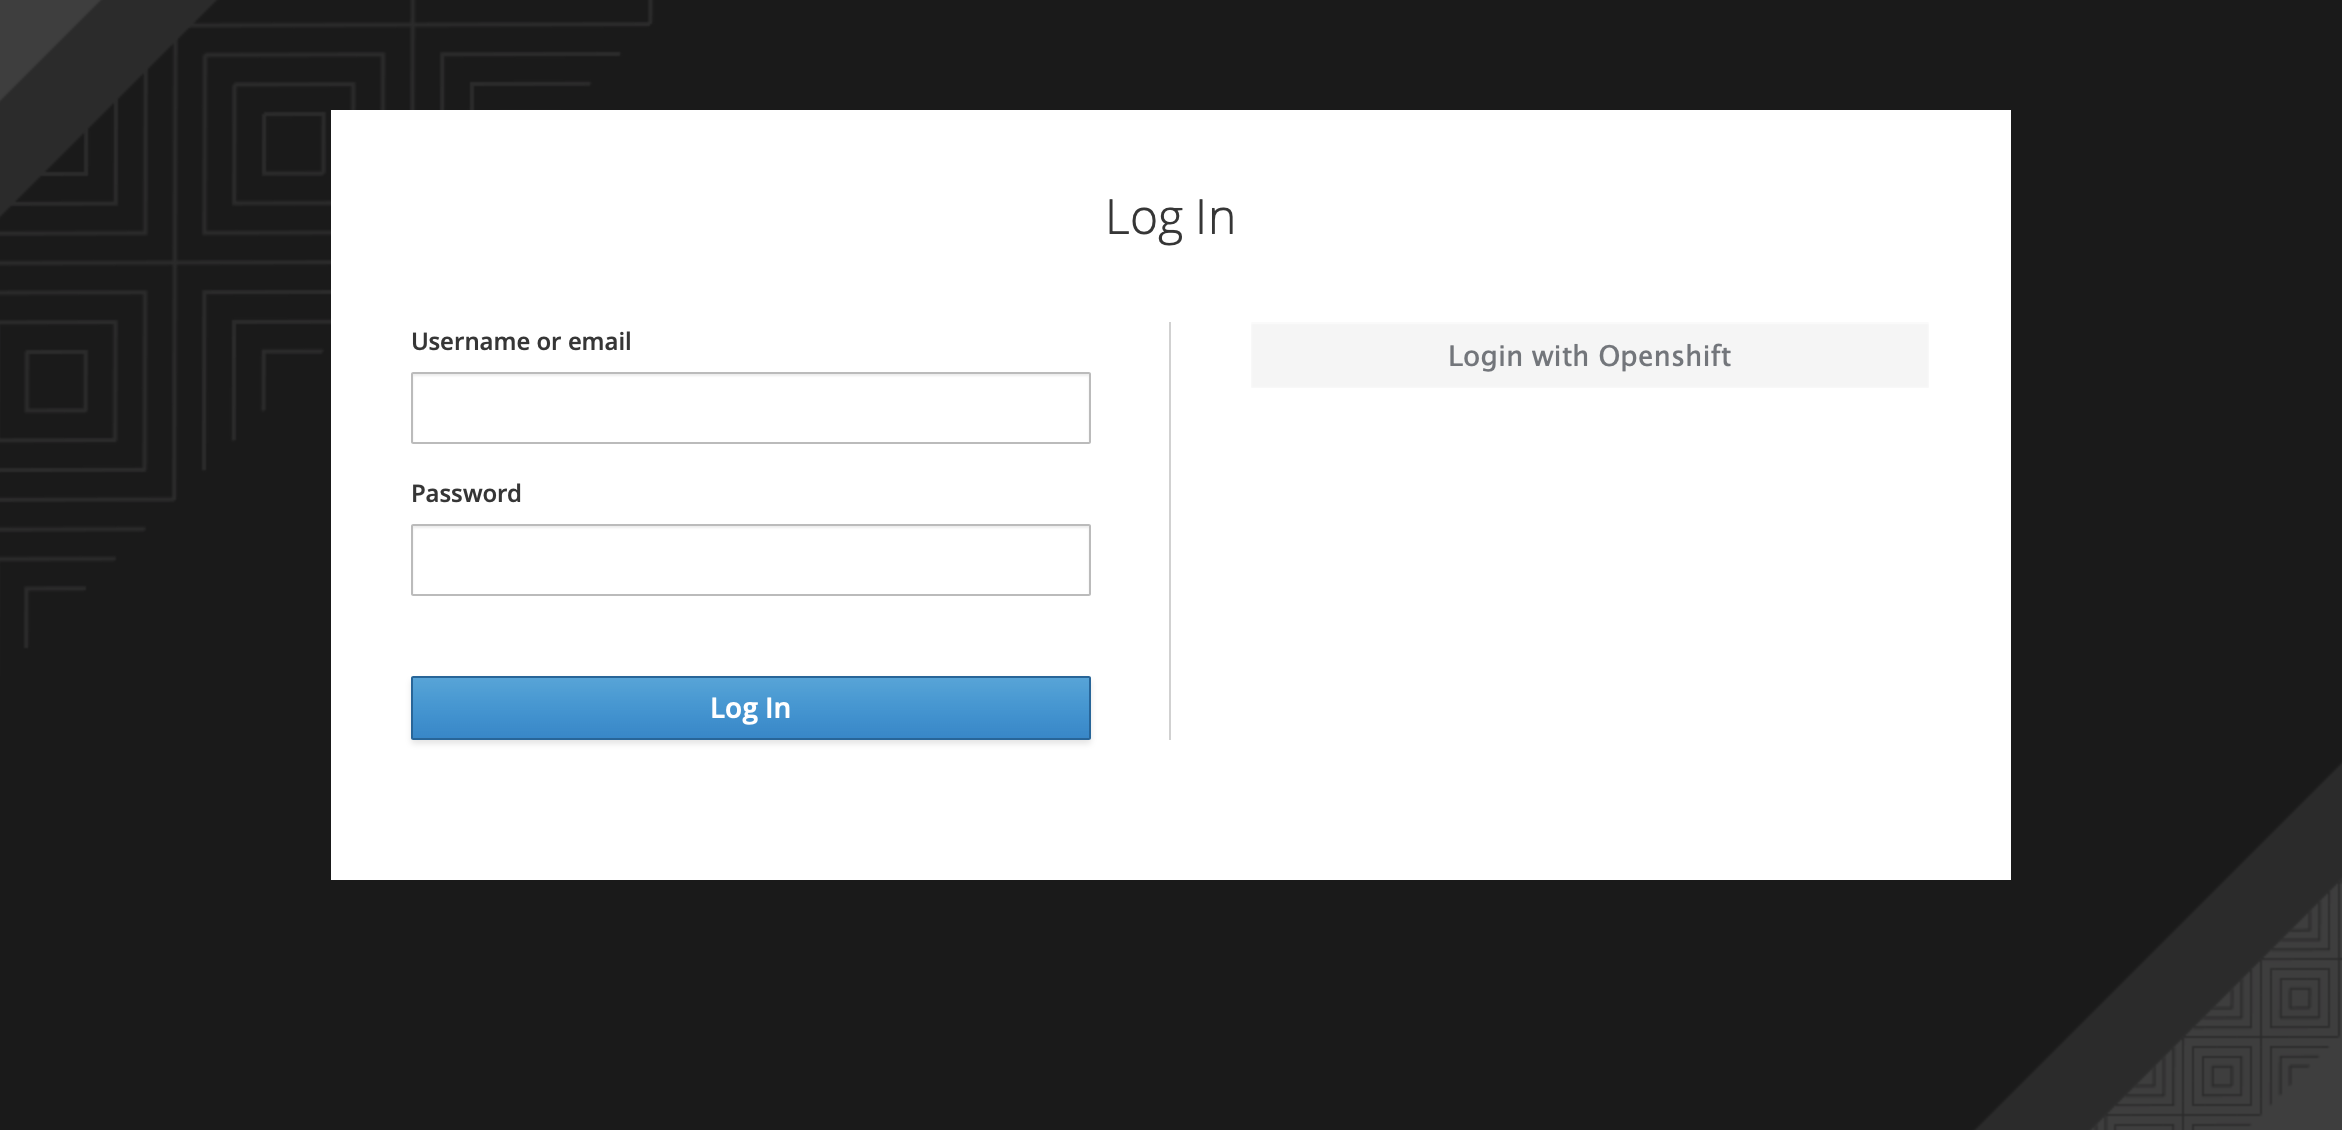 Login with Openshift